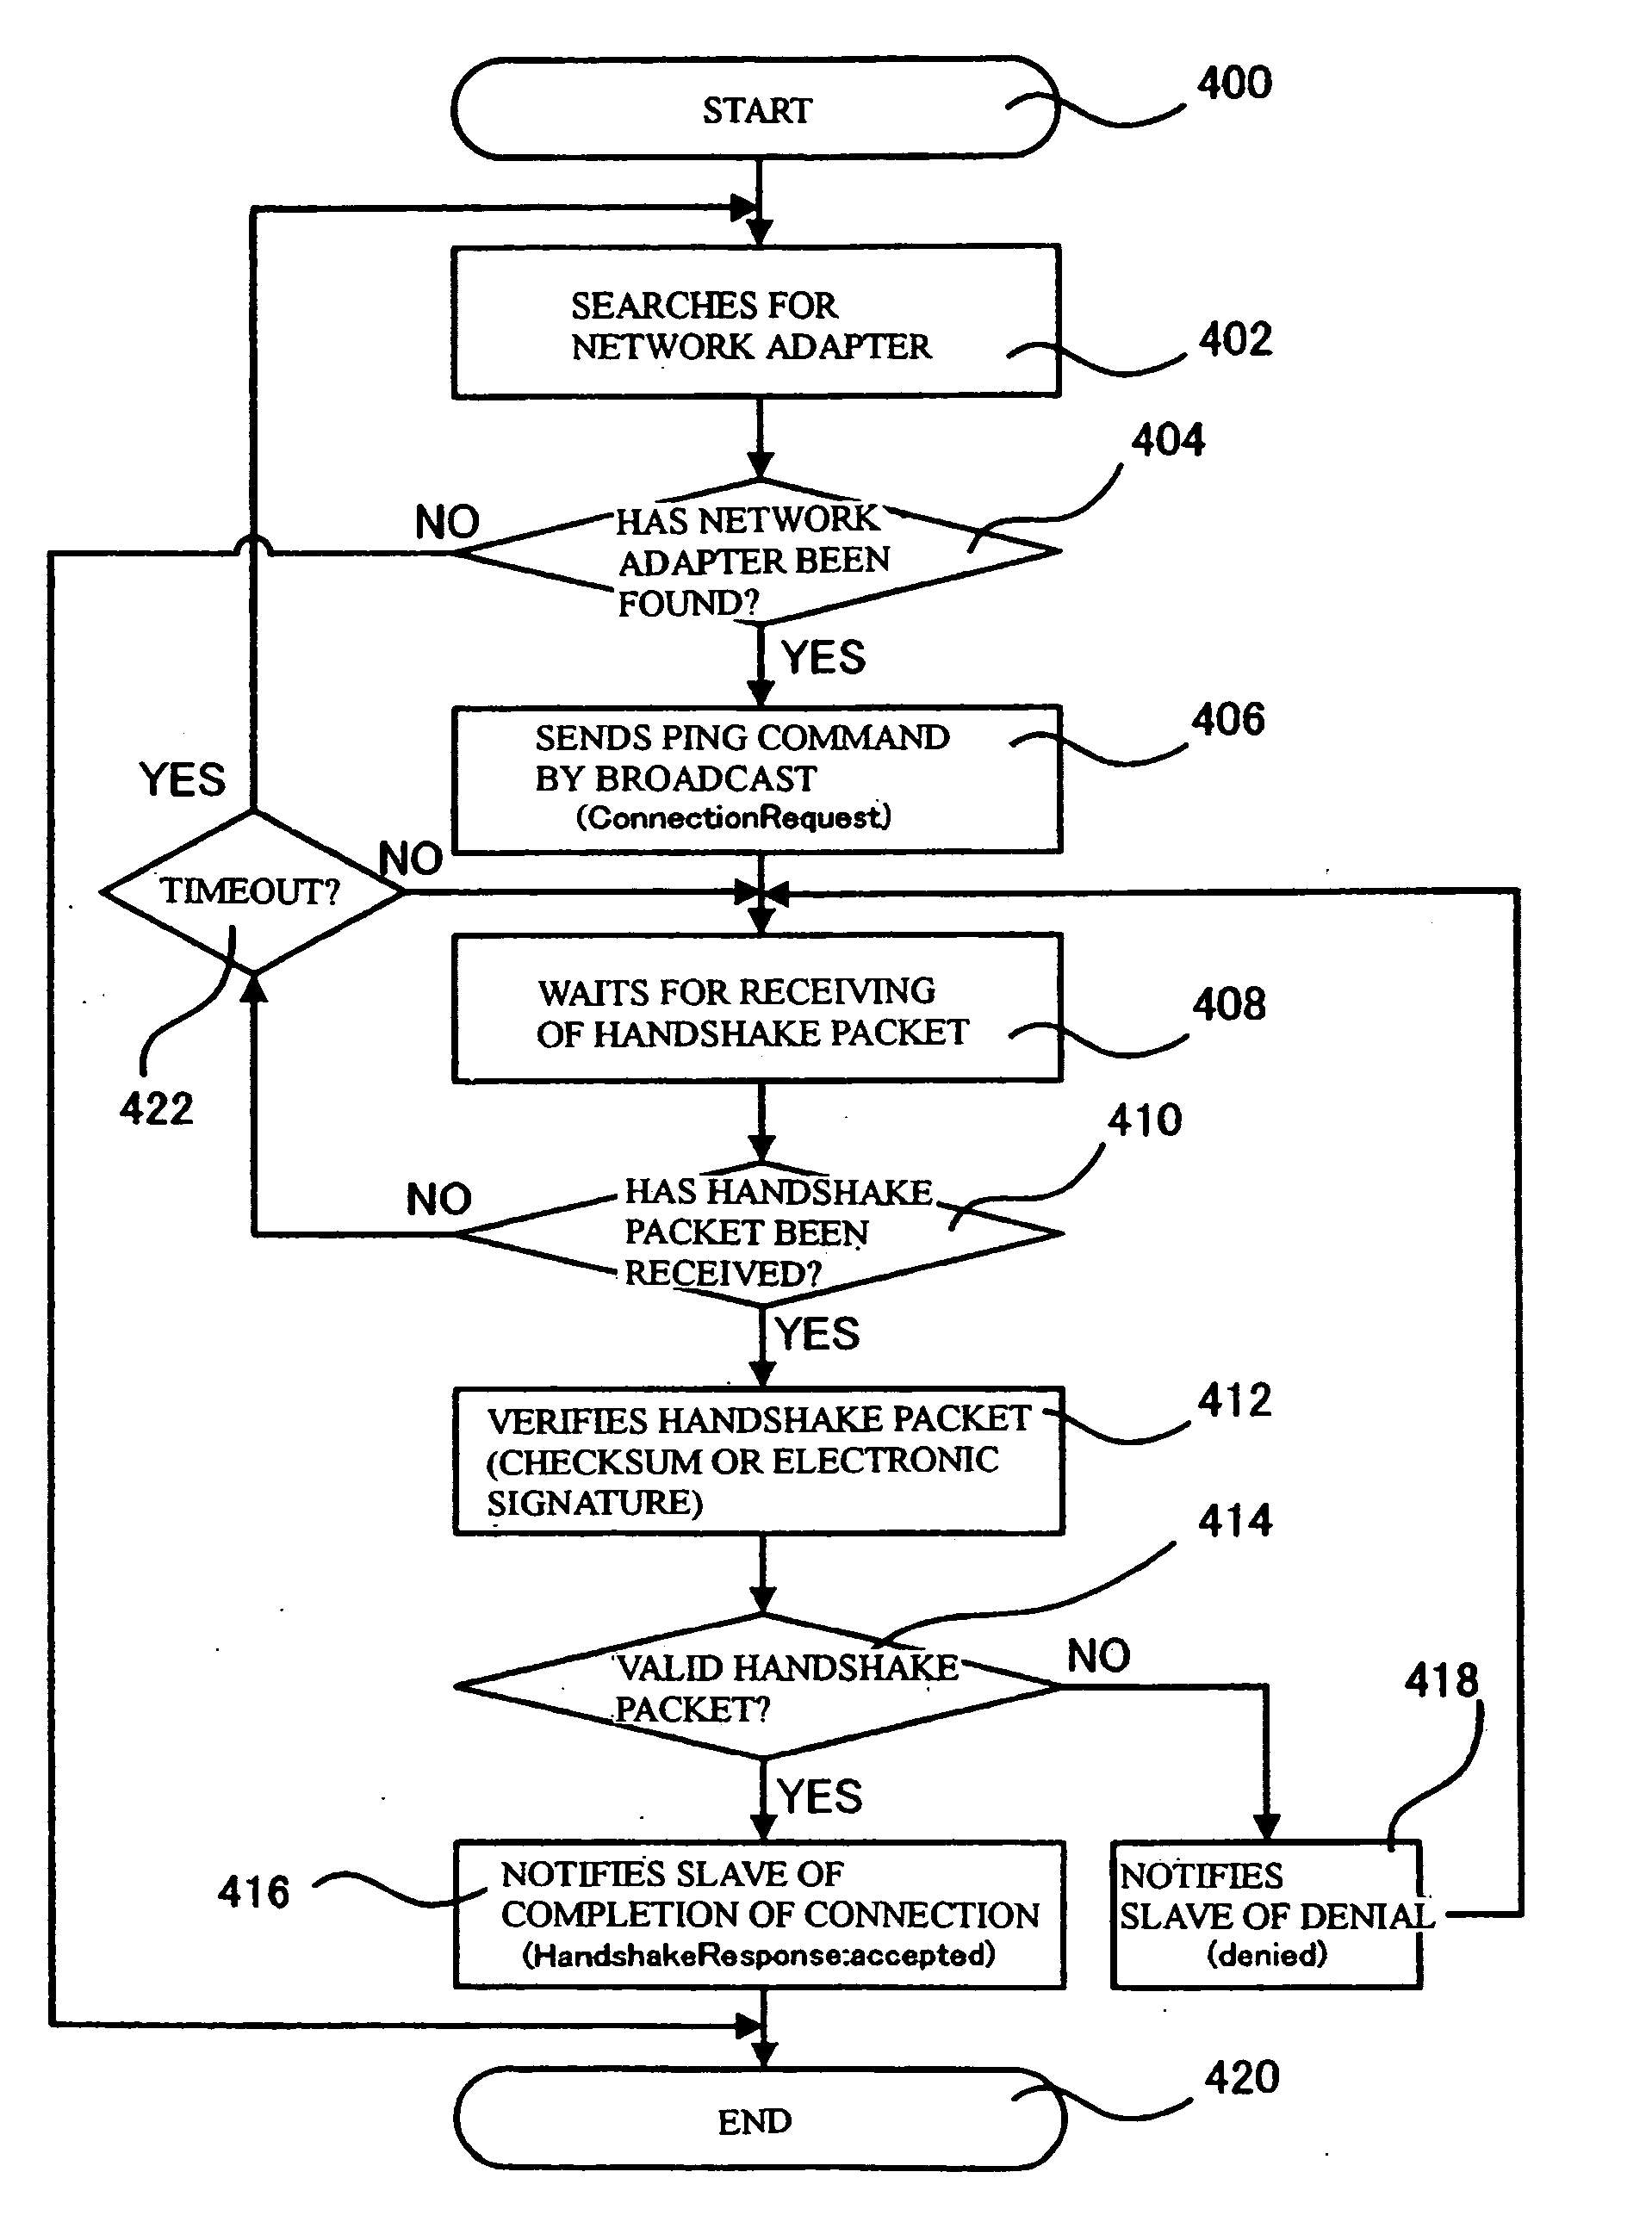 Data transmission among network-connected information processors